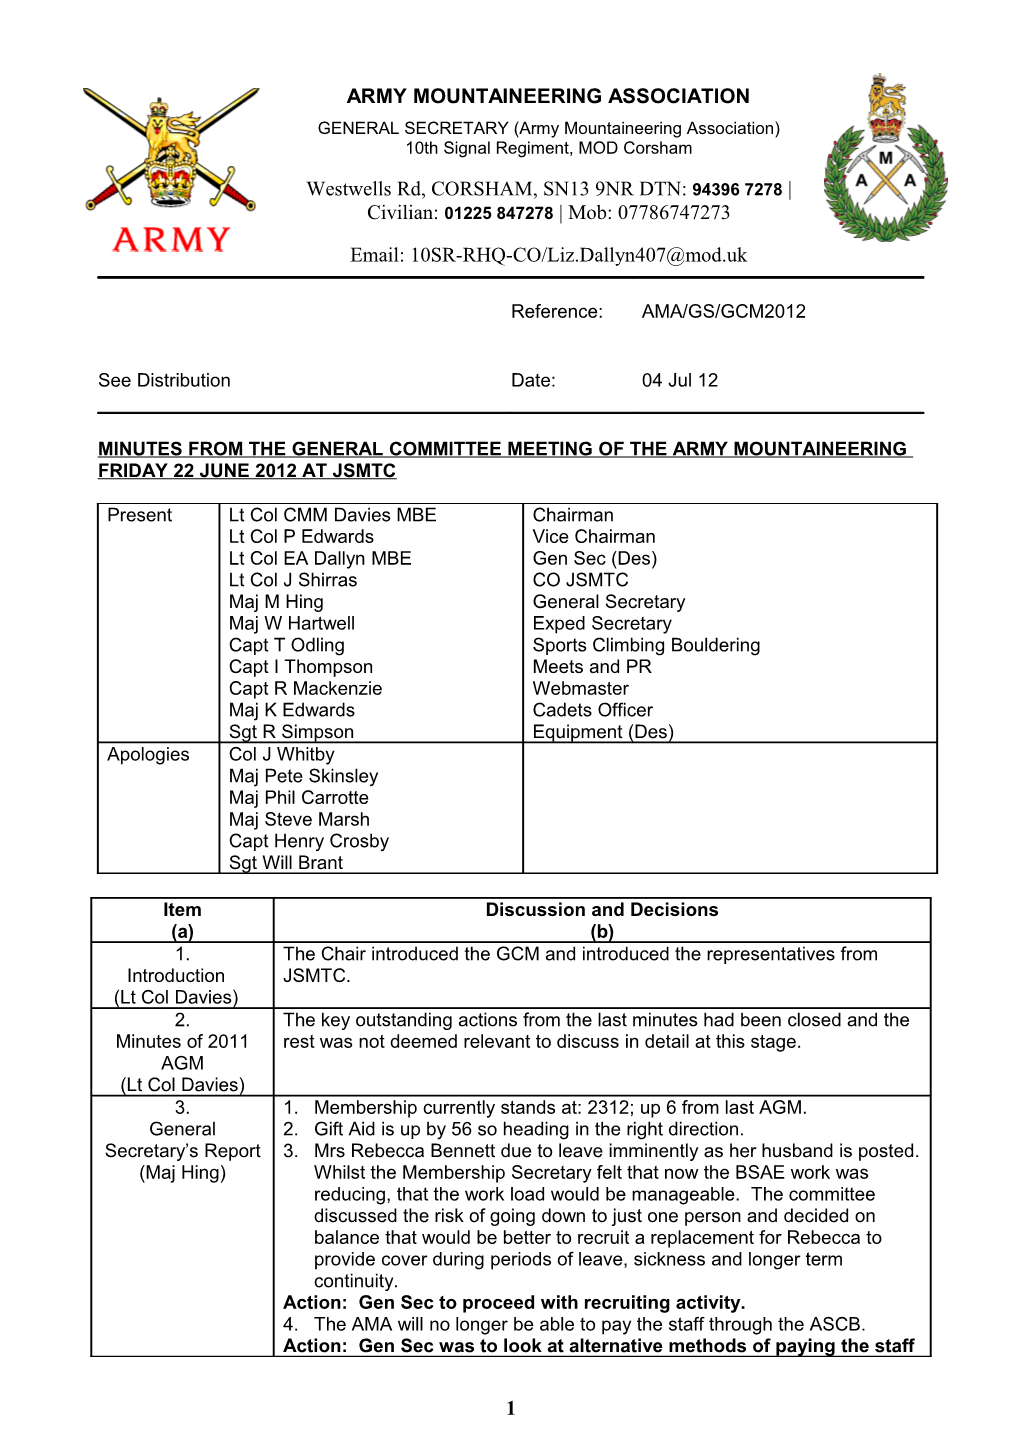 Minutes from the General Committee Meeting of the Army Mountaineering Friday 22 June 2012